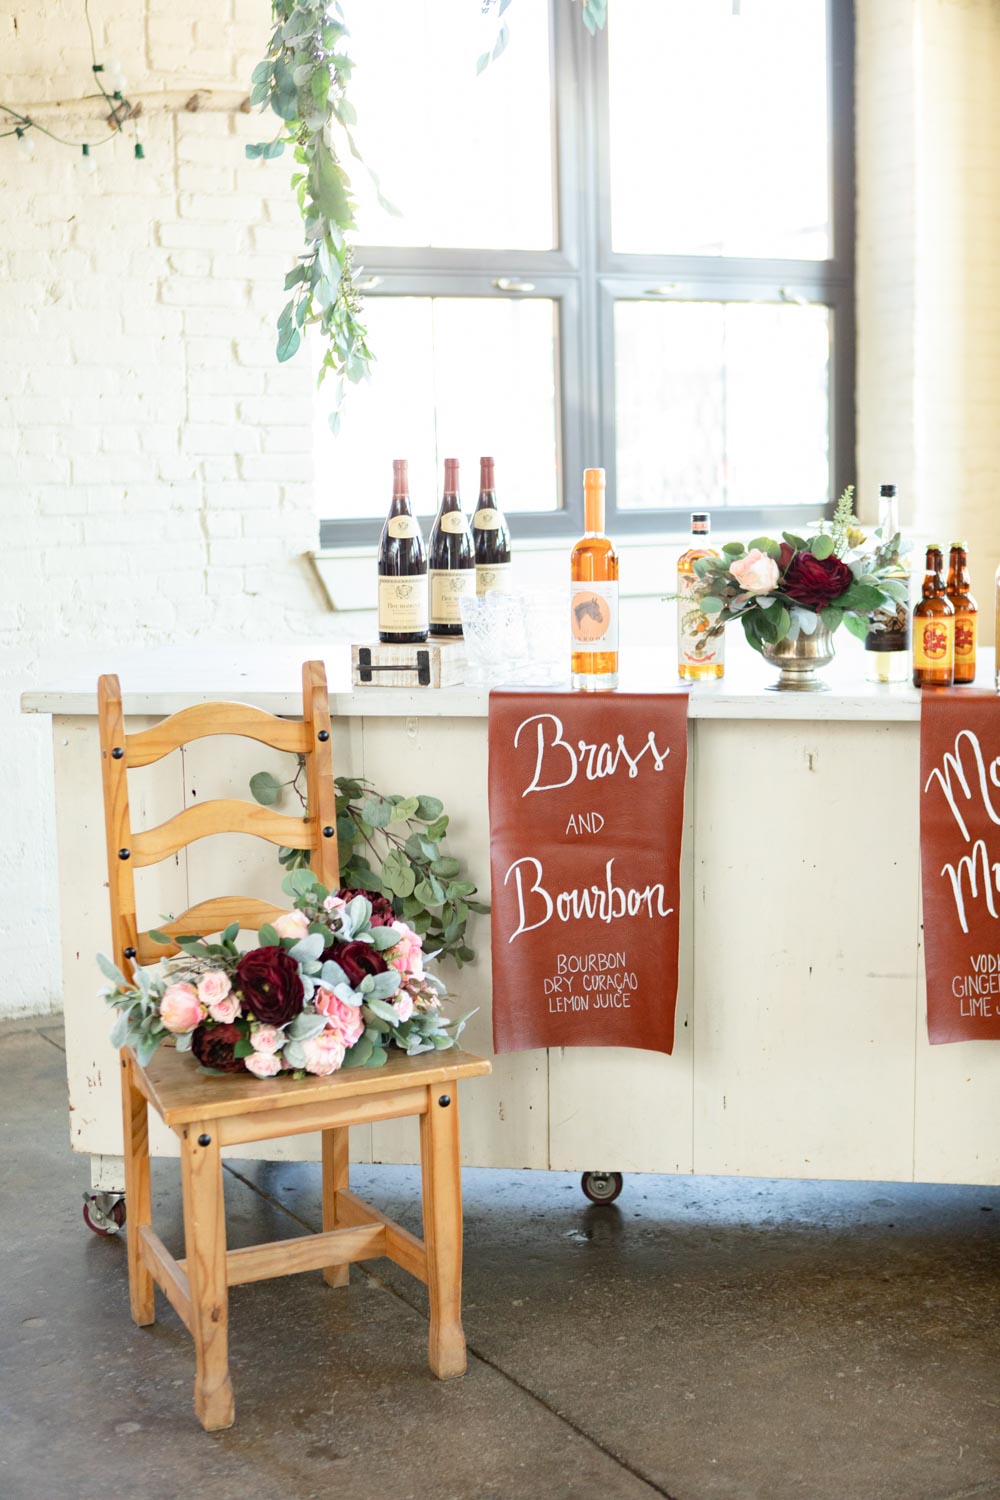 An all-female vendor team created this gorgeous burgundy and gold LGBTQ+ wedding inspiration at The White Room in Worcester, Massachusetts. The venue is situated in a historic mill building. The models are a real-life couple who are getting married this October. We love the burgundy contrasted with blush, rusty orange and the leather and gold touches.